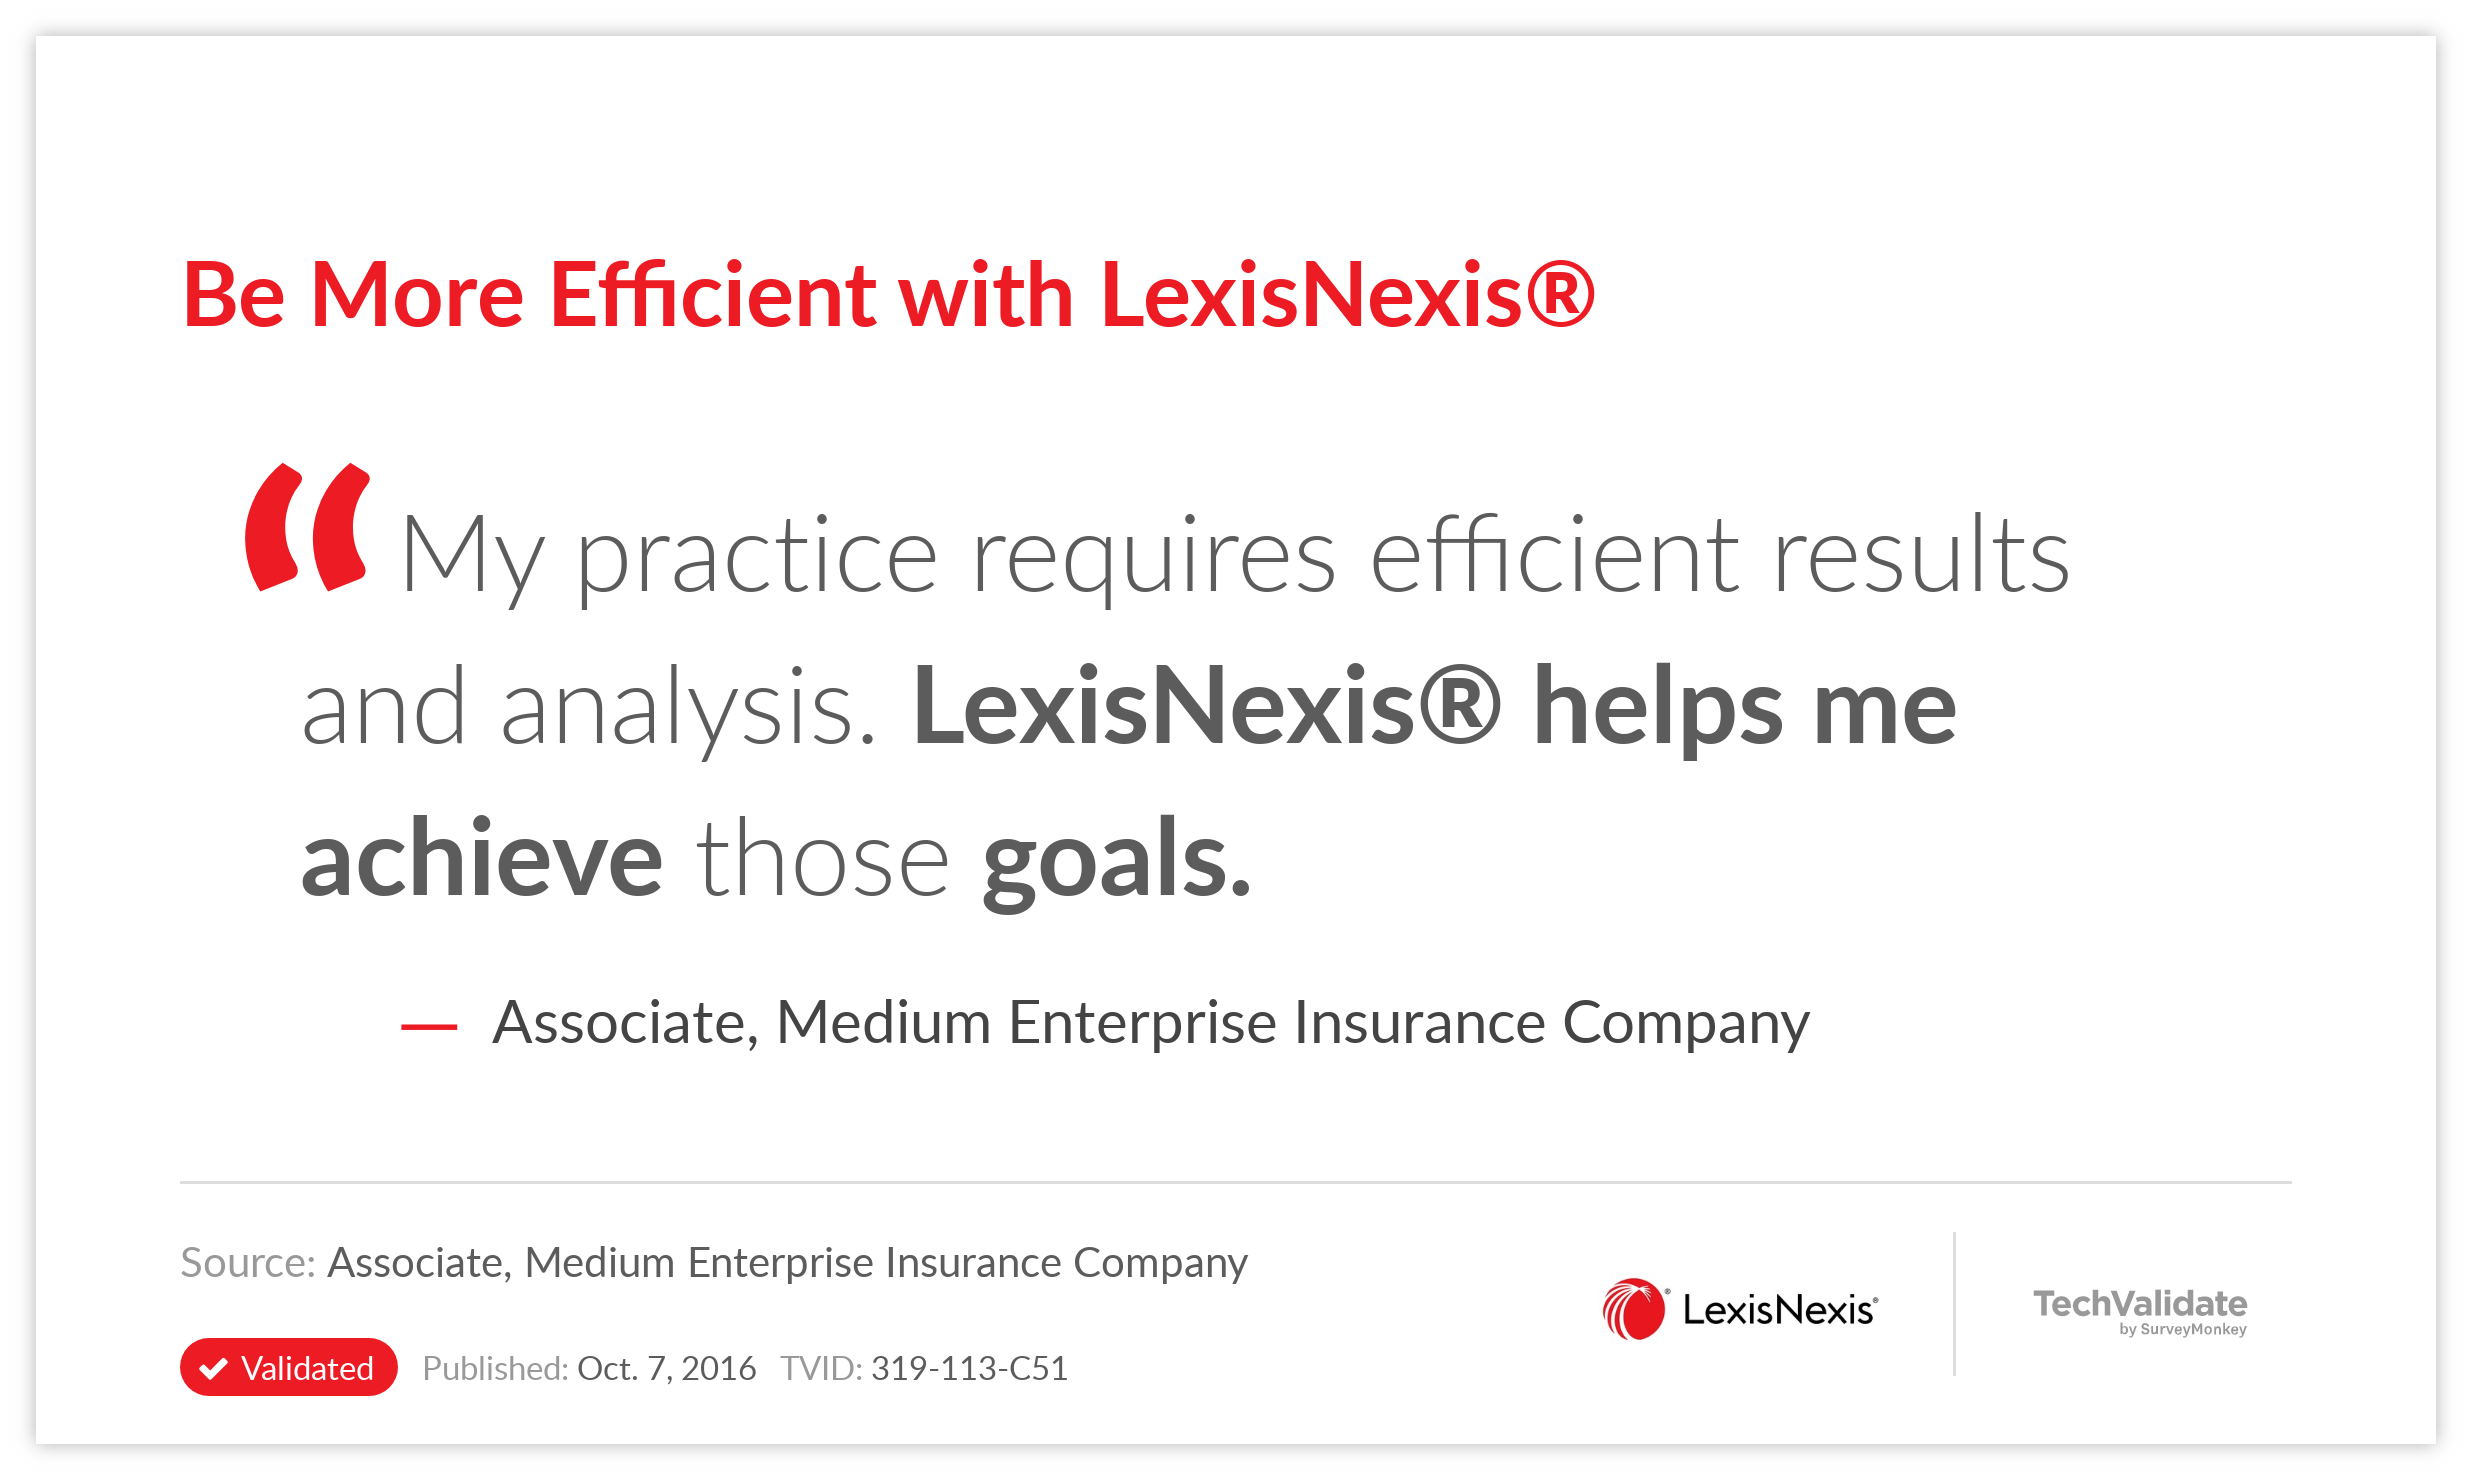 Be More Efficient with LexisNexis®